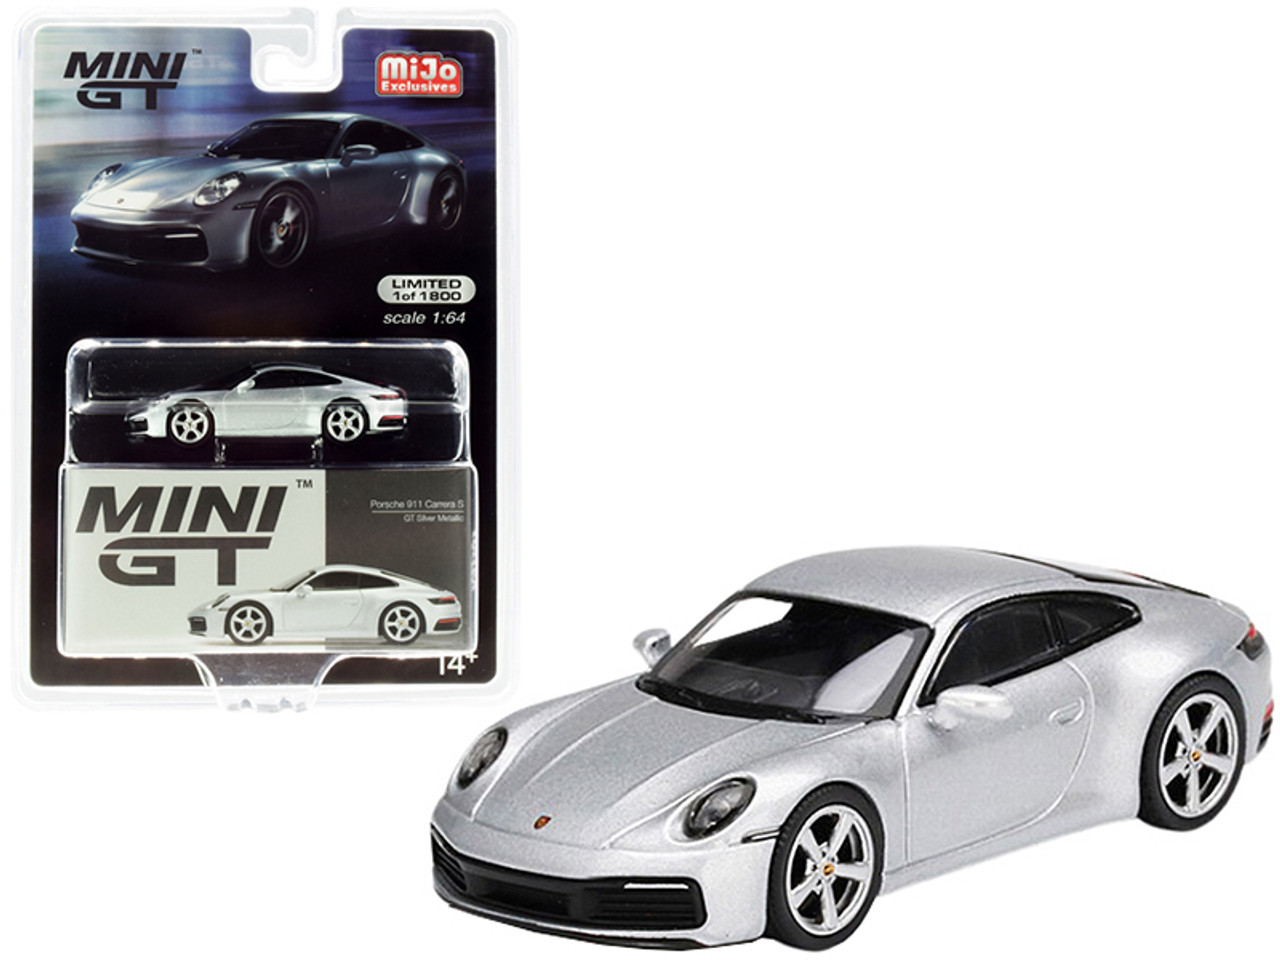 Porsche 911 Carrera S GT Silver Metallic Limited Edition to 1800 pieces Worldwide 1/64 Diecast Model Car by True Scale Miniatures